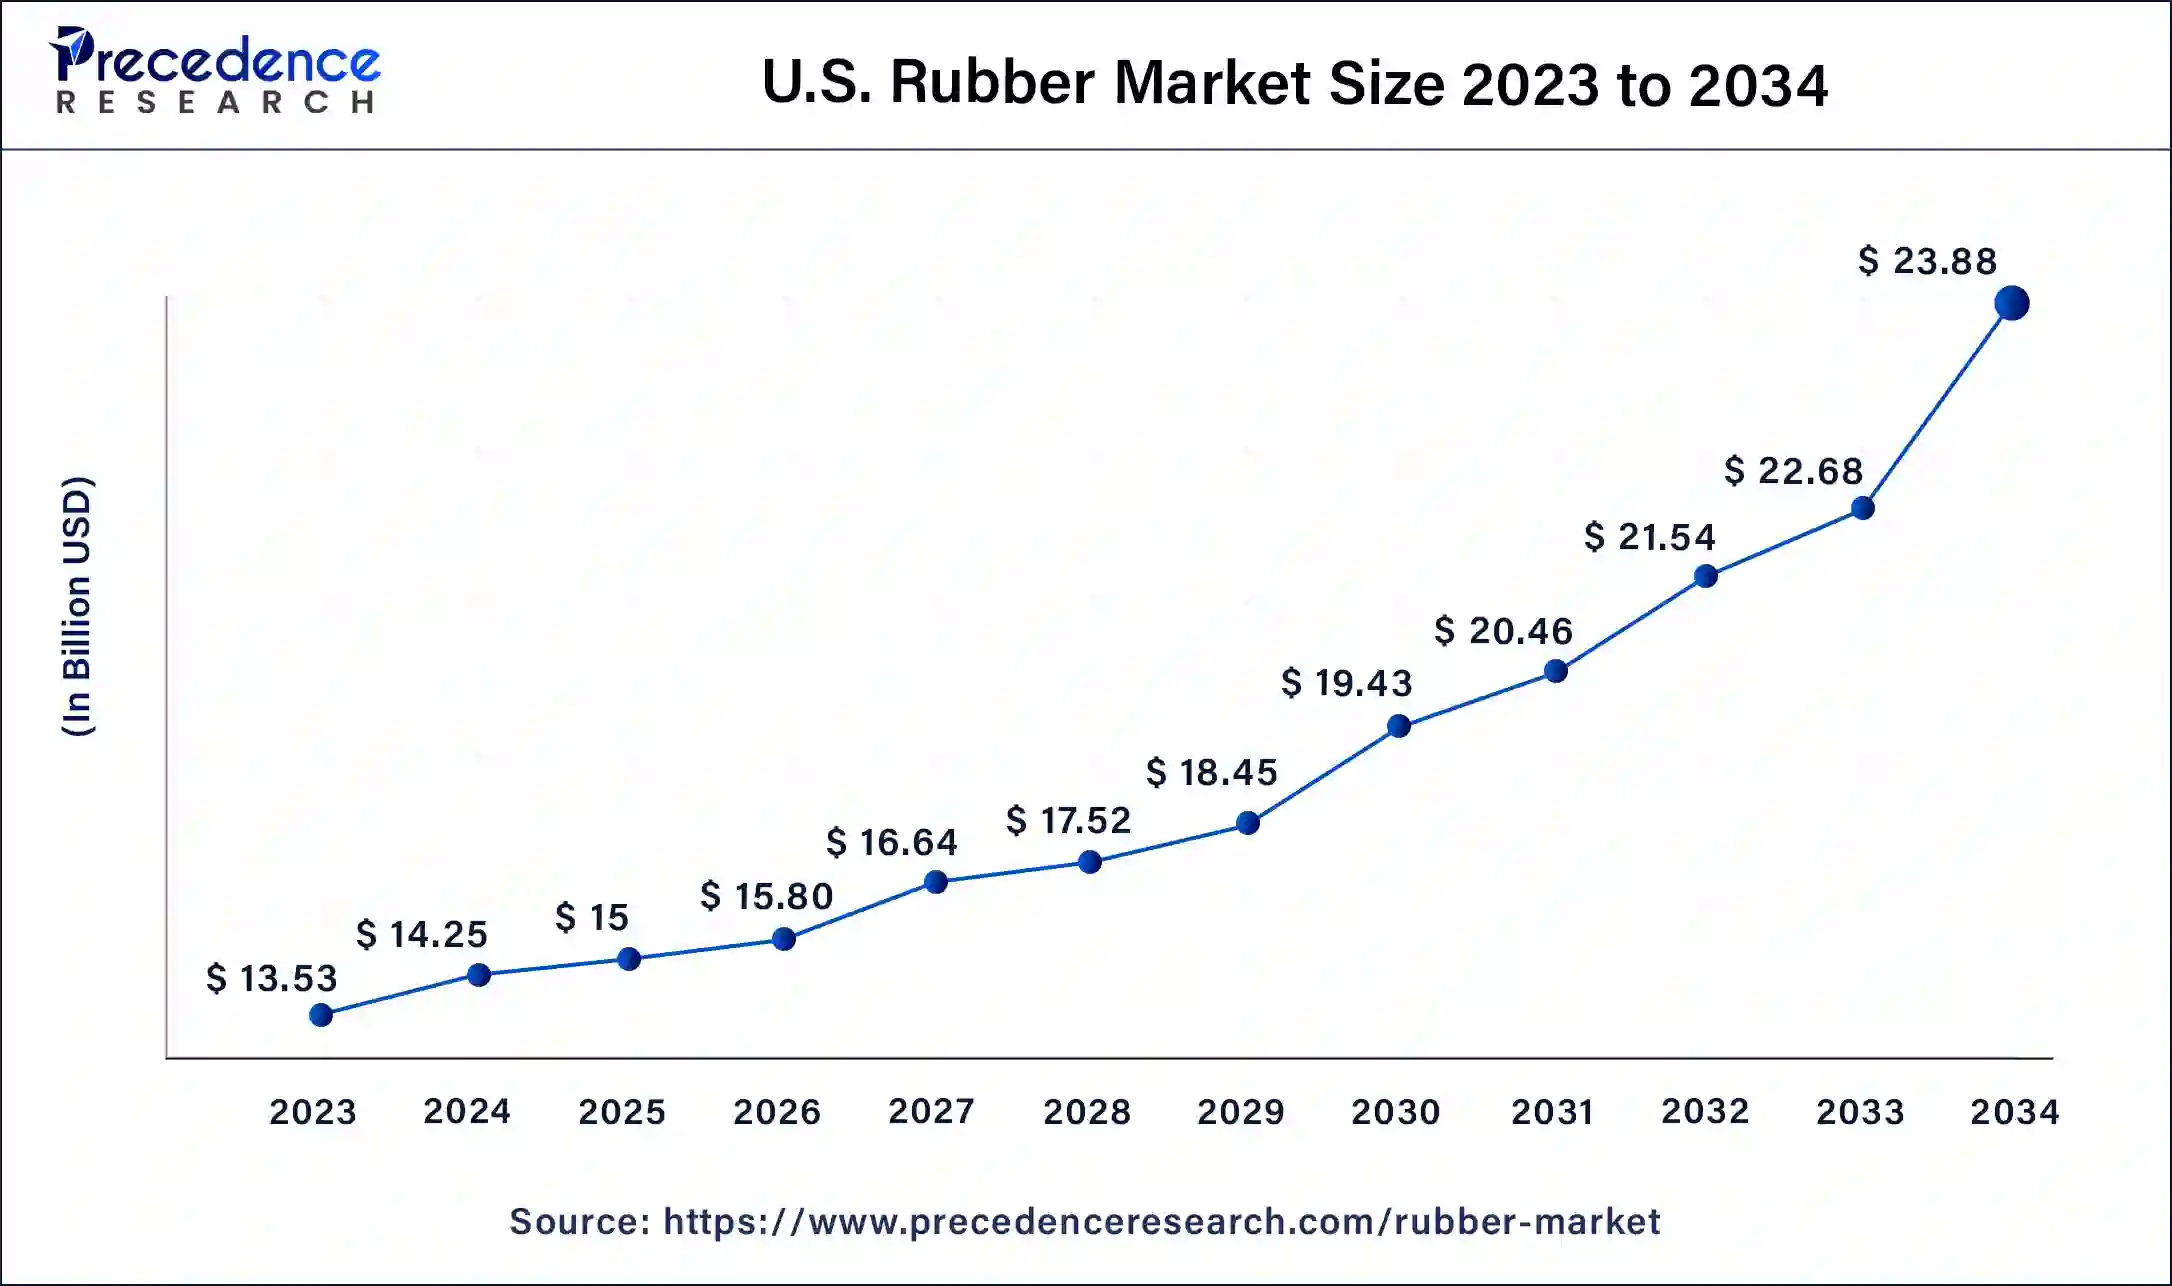 U.S. Rubber Market Size 2024 to 2034